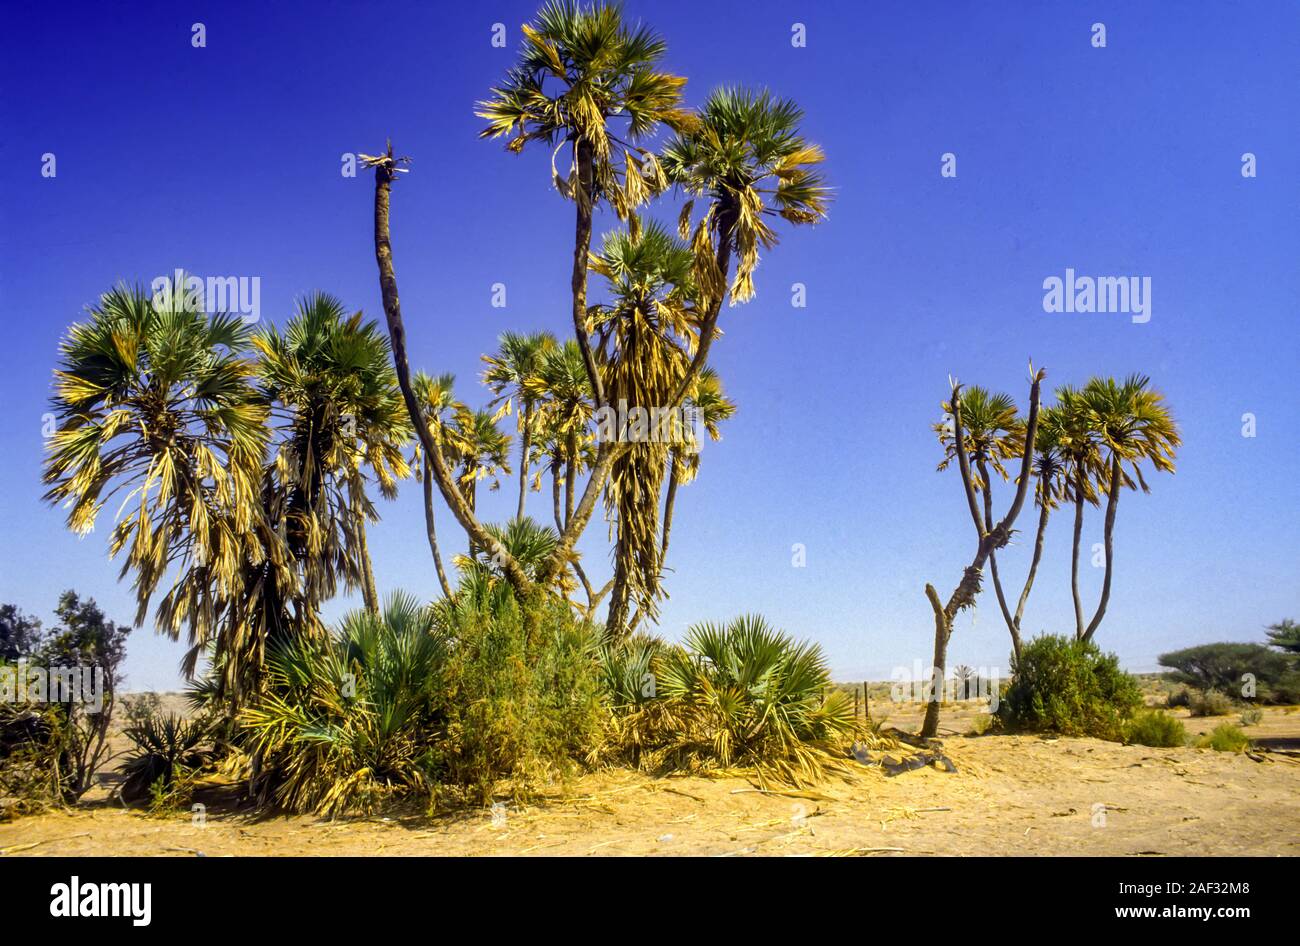 Hyphaene thebaica, with common names doum palm and gingerbread tree, is a type of palm tree with edible oval fruit. It is native to the Nile valley in Stock Photo